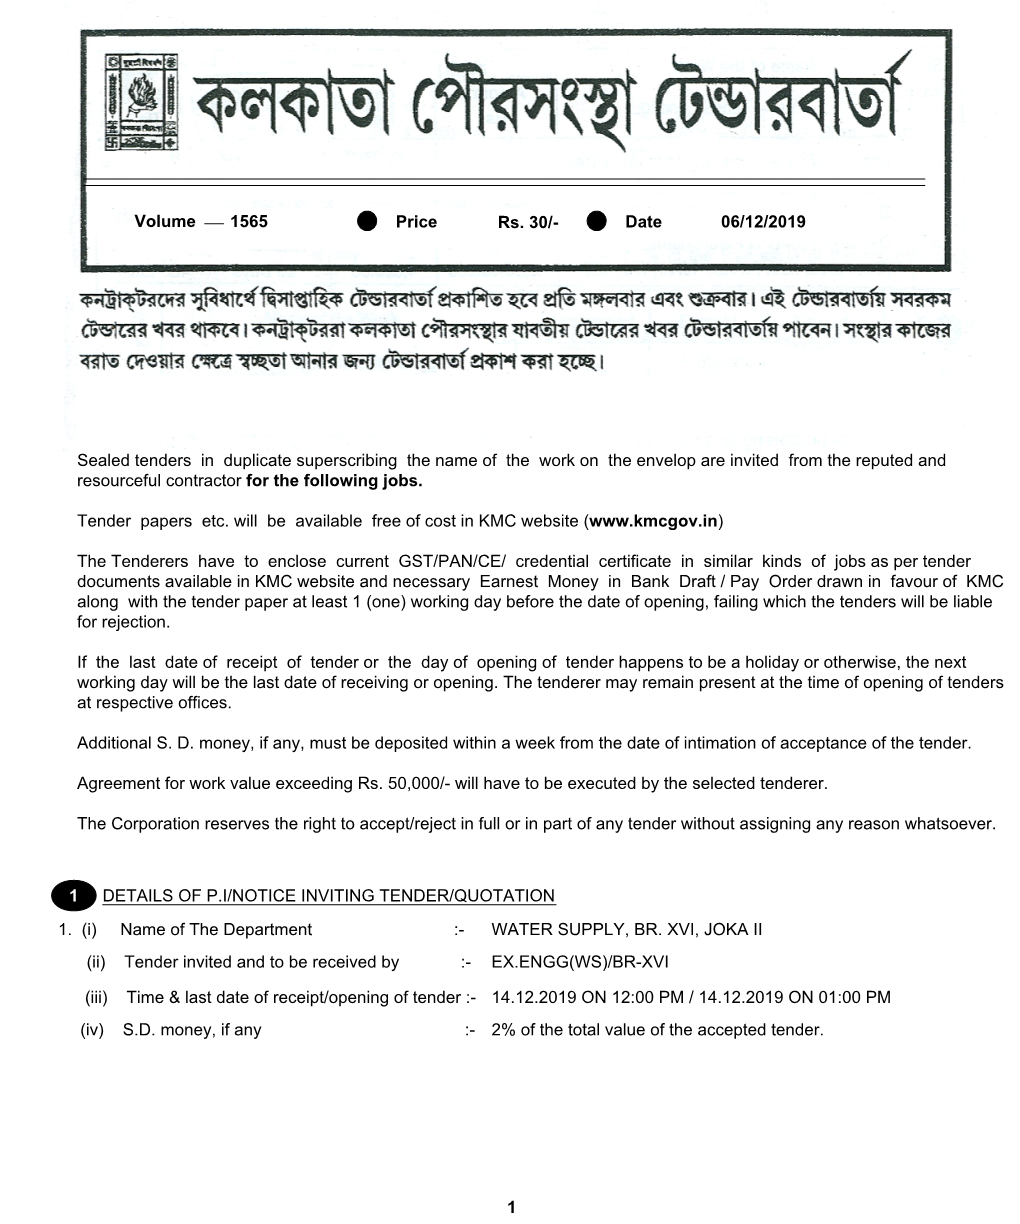 1 Details of P.I/Notice Inviting Tender/Quotation 1